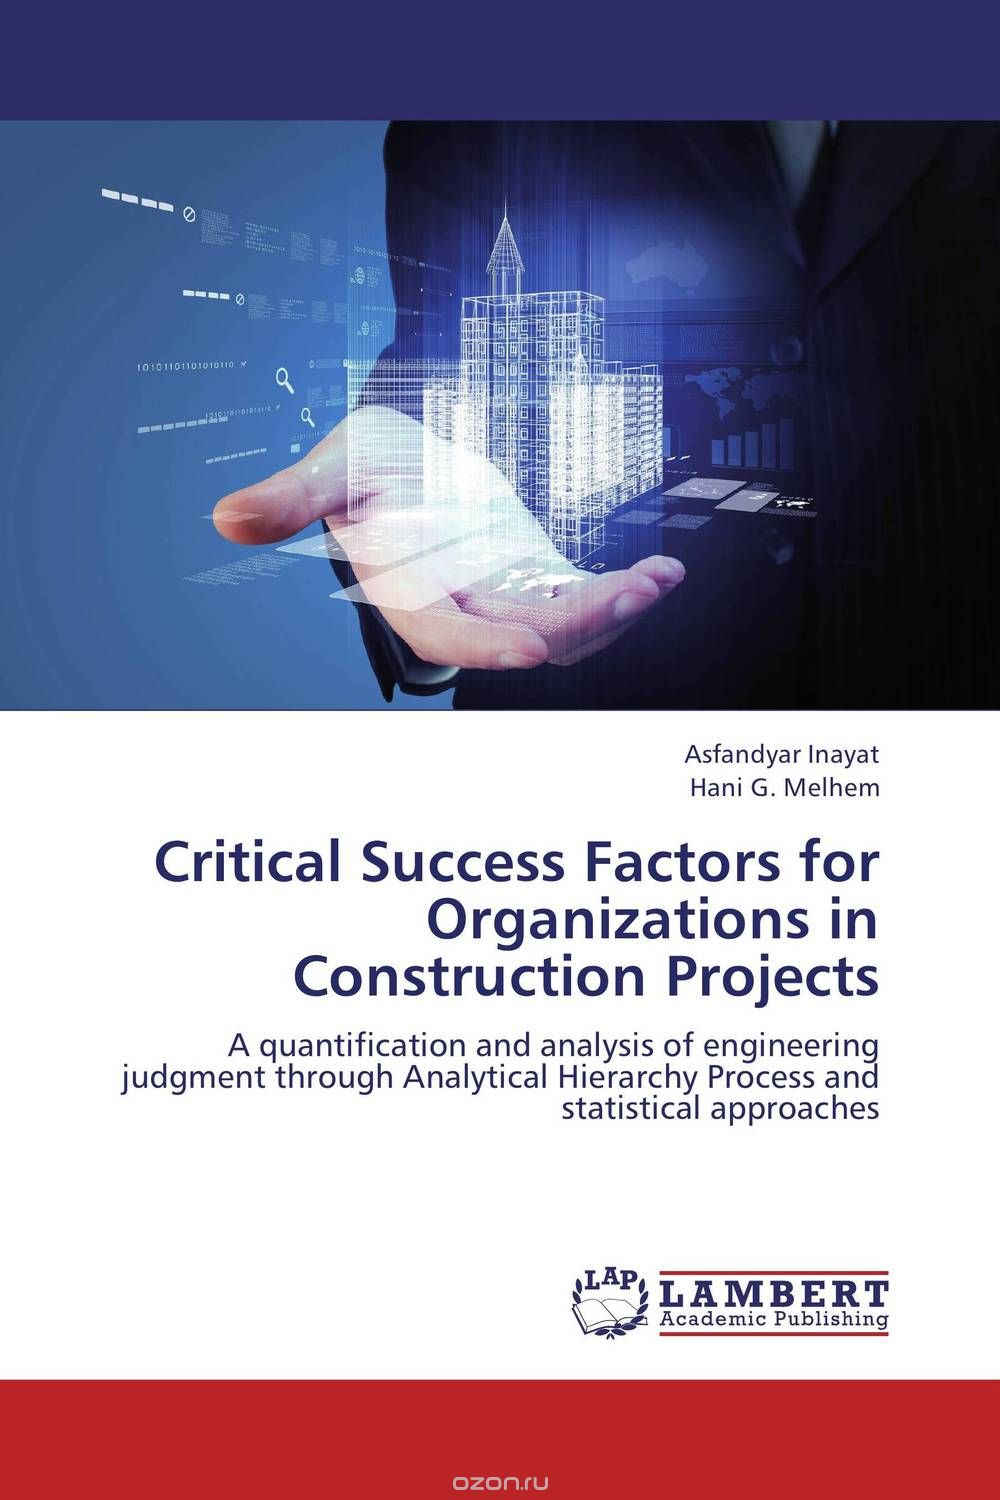 Critical Success Factors for Organizations in Construction Projects